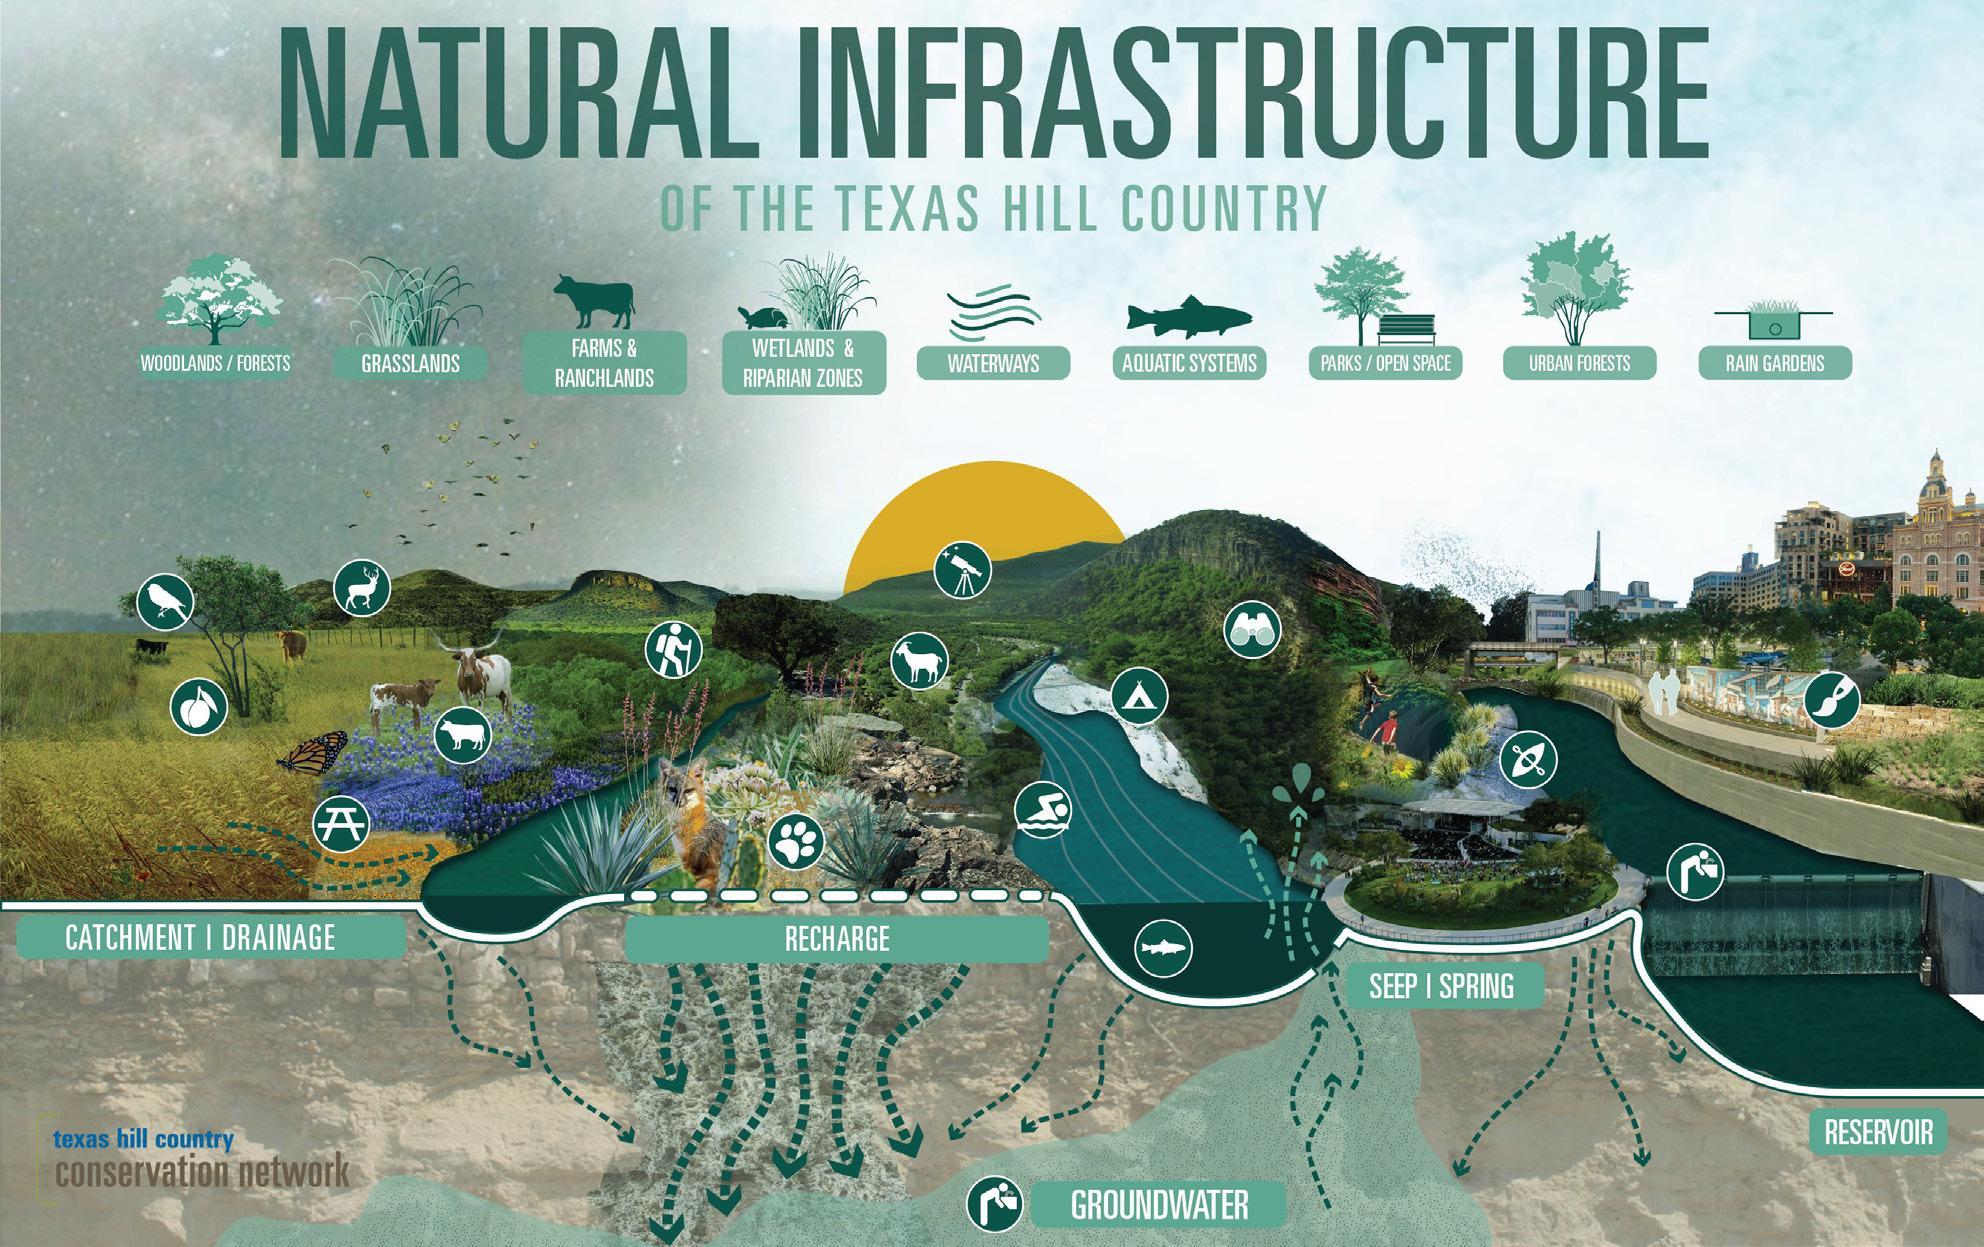 New plan provides a shared vision for preserving the iconic Texas Hill Country